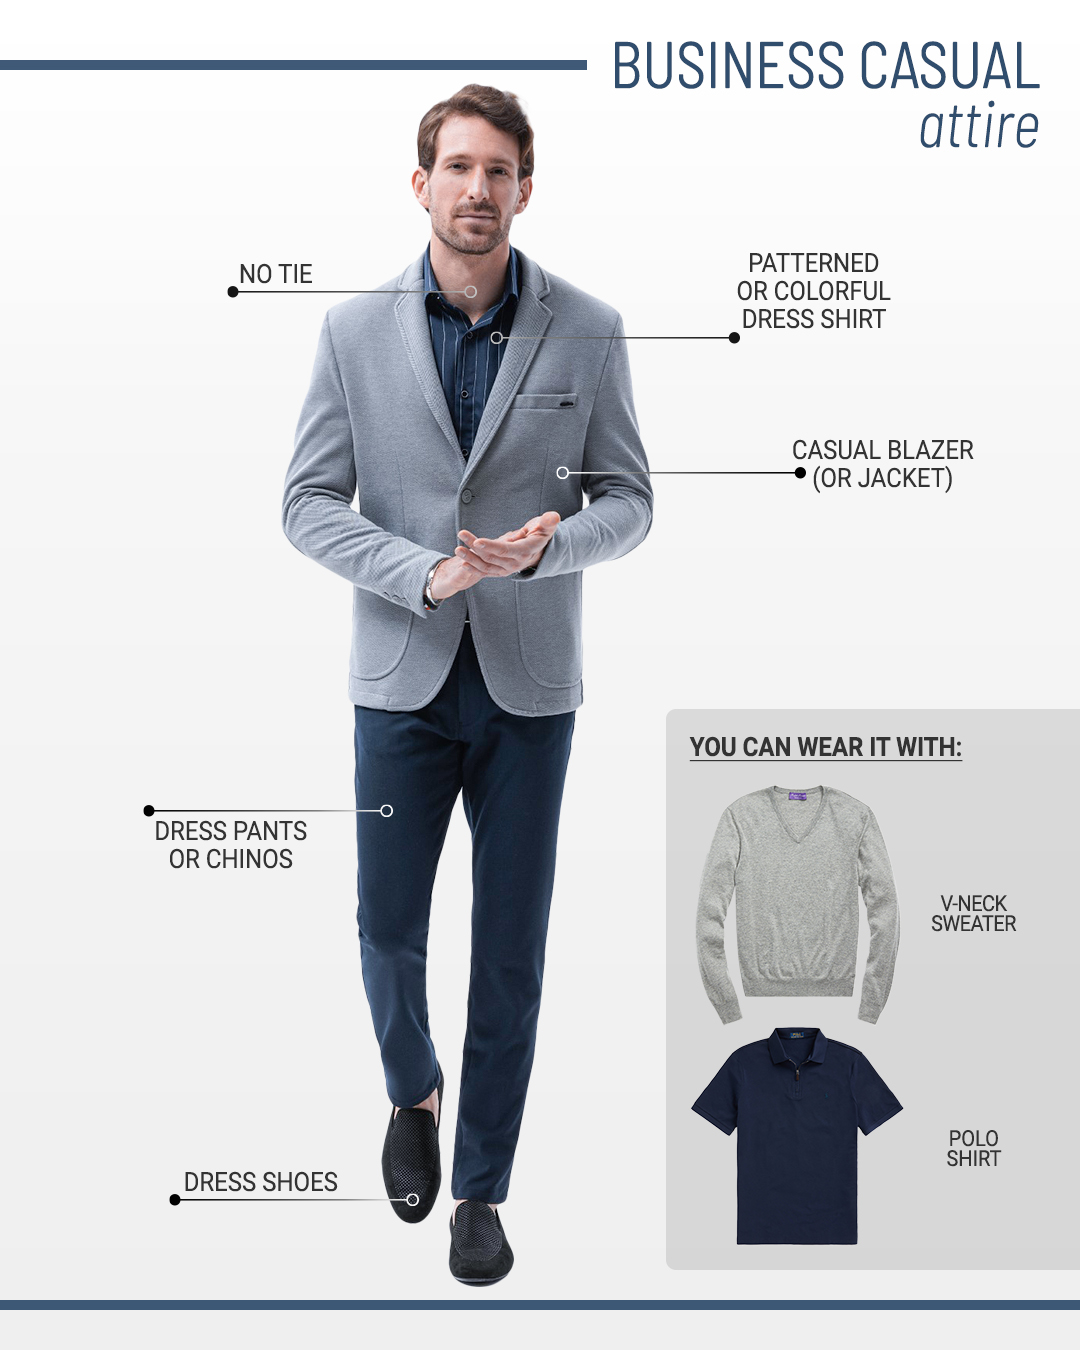 Business casual dress code and atiire for men